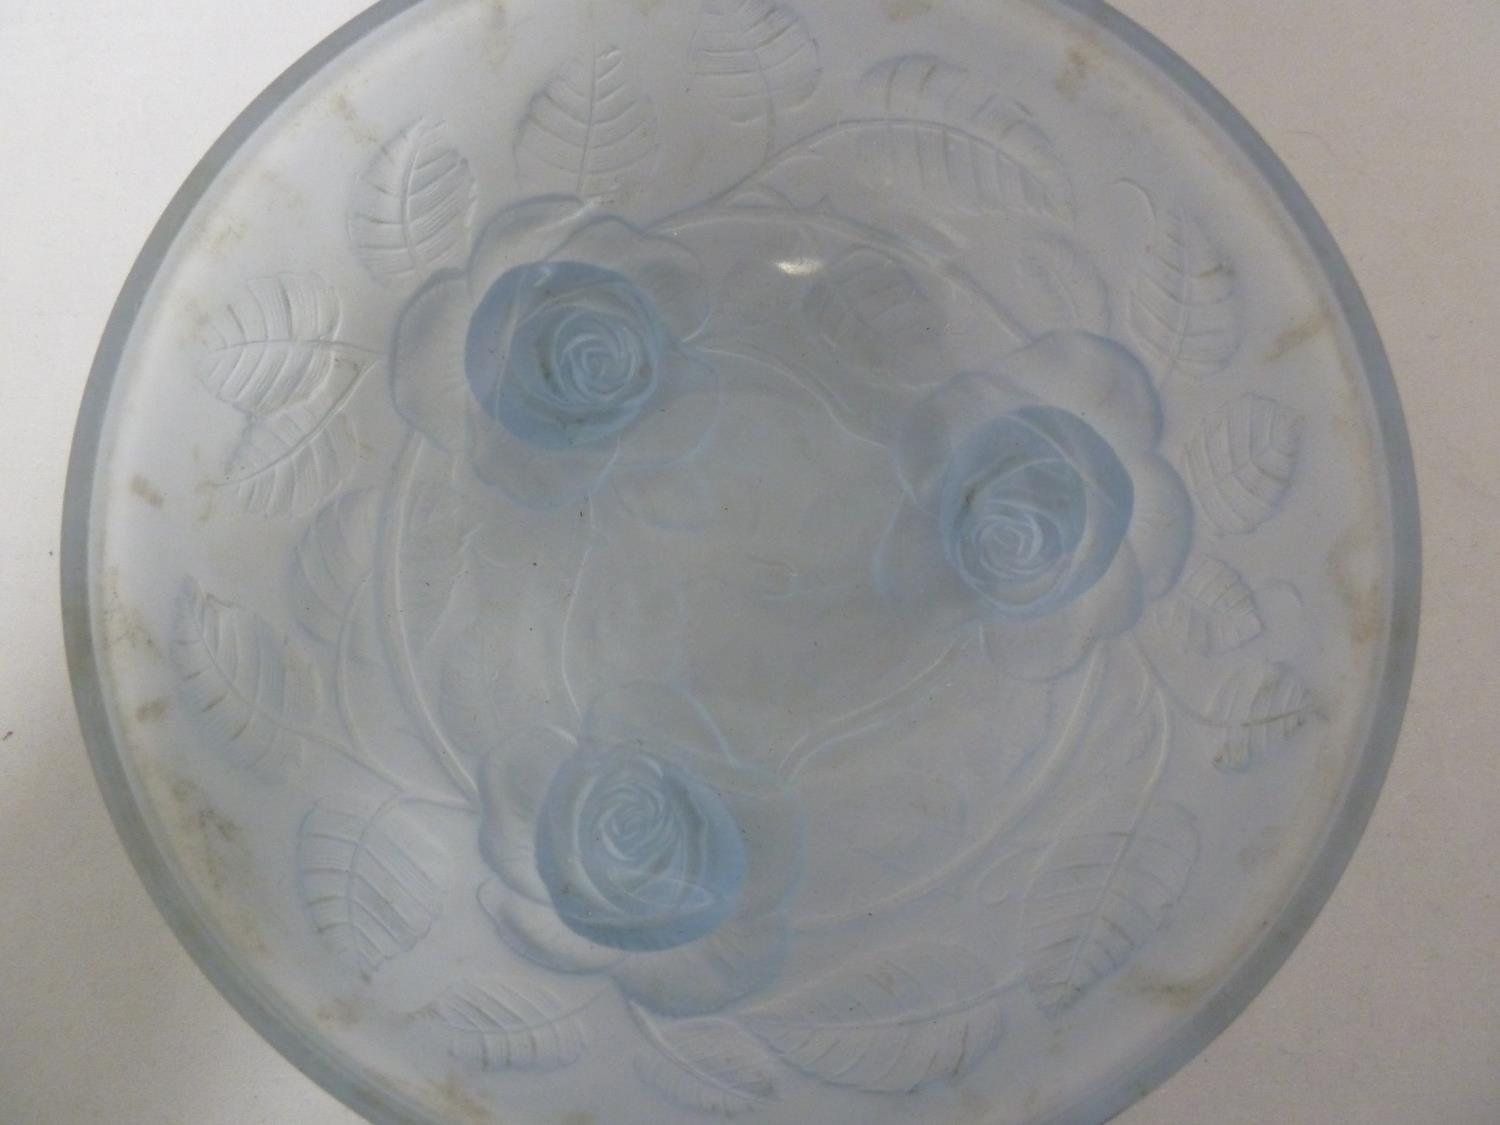 A Group of Art Deco blue glass wares, including a clock case, decorated with two semi clad women - Image 12 of 29